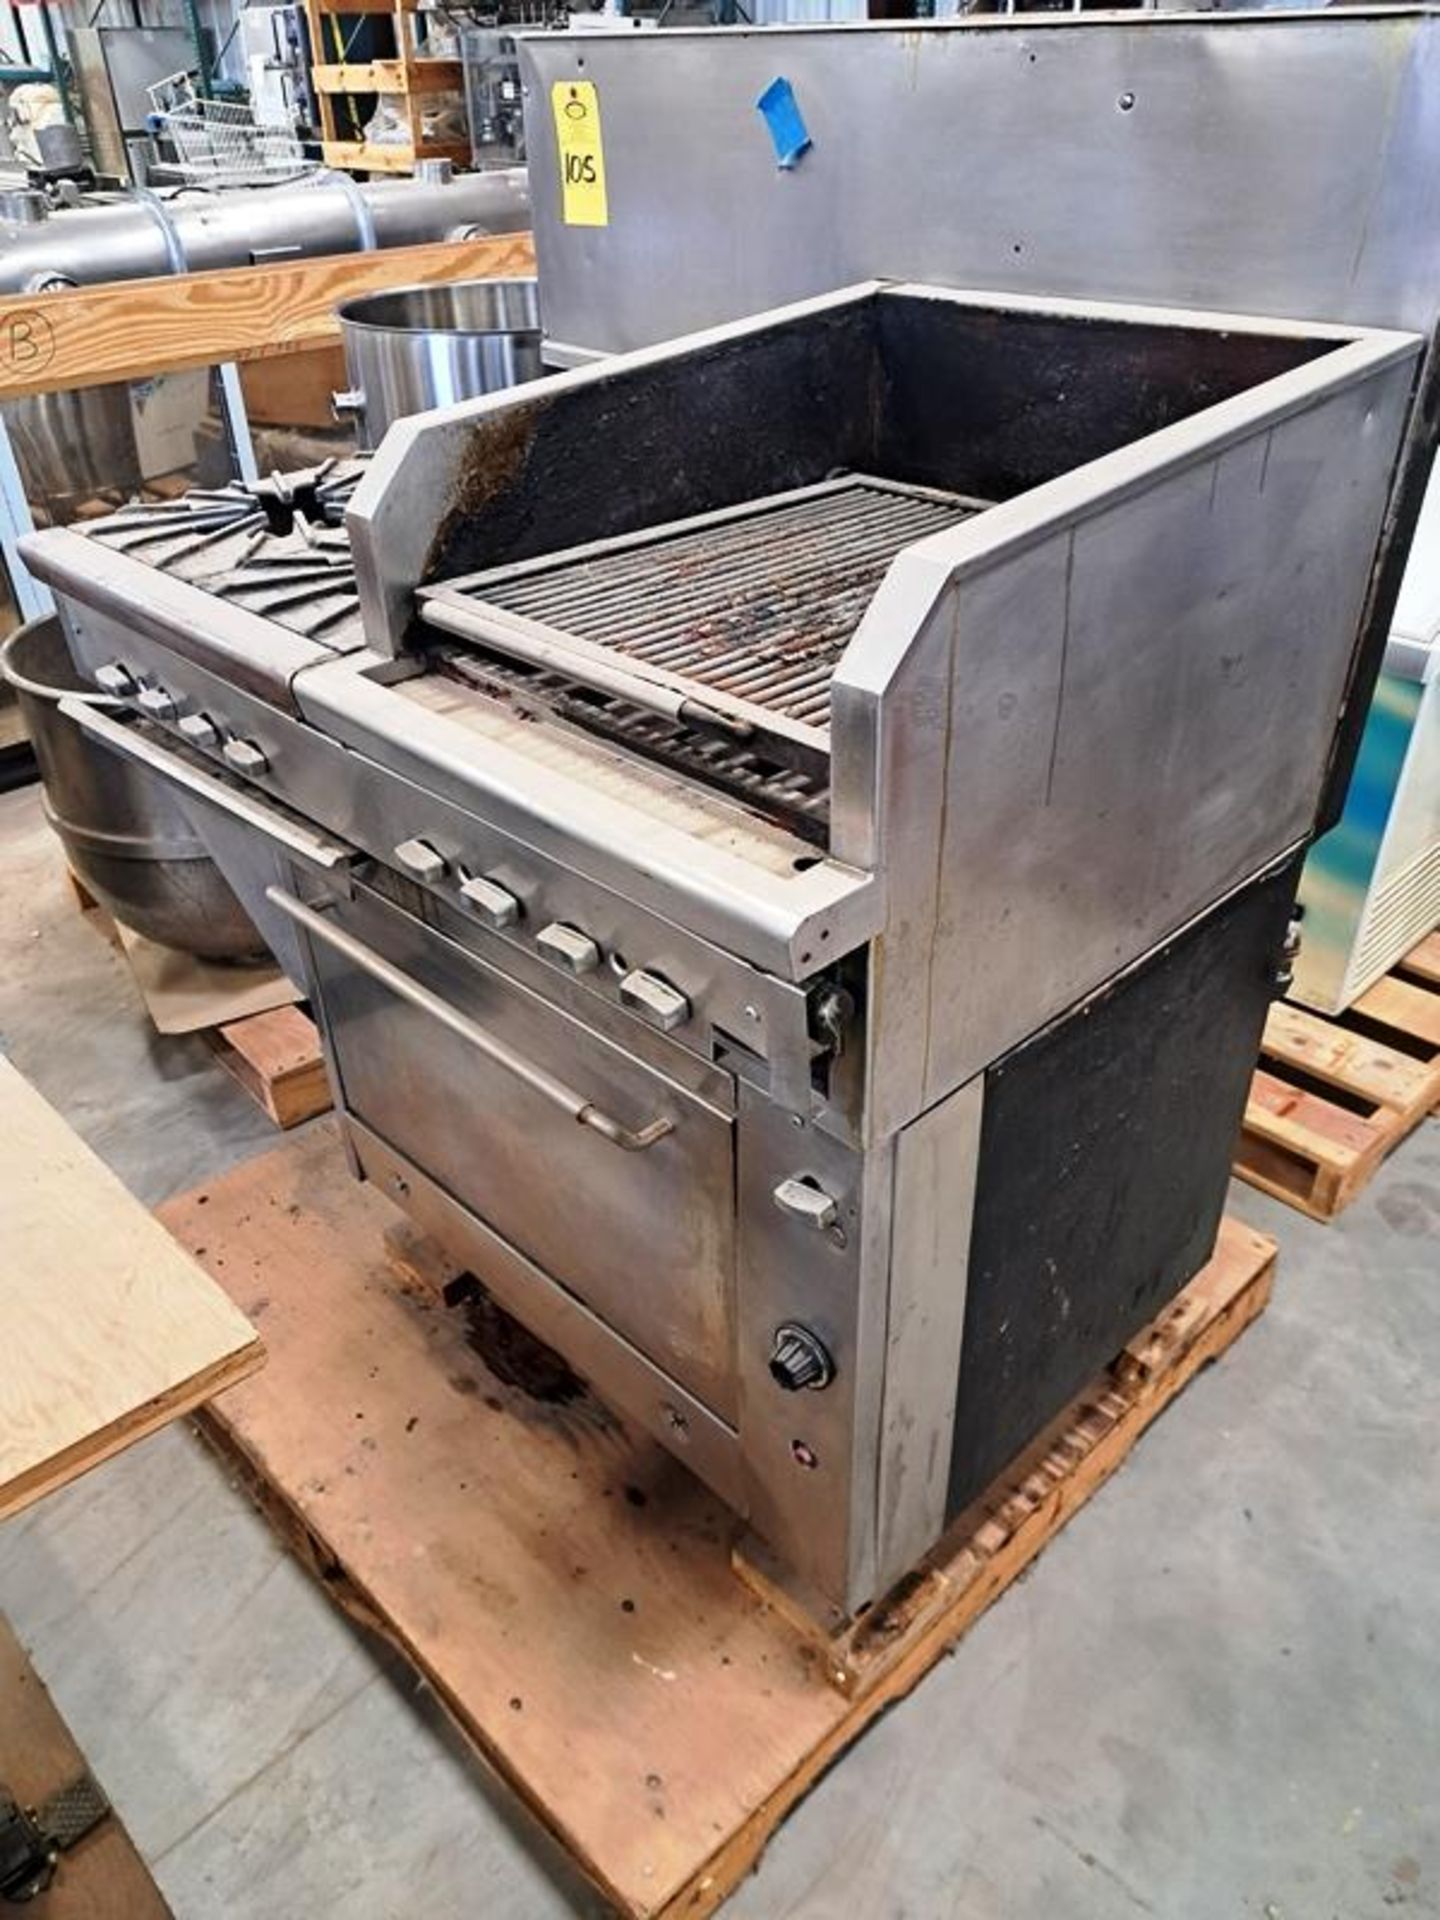 Quest 4-Burner Stove, Grill, Oven, gas fired, 4' wide X 3' deep X 58" tall (Required Loading Fee: $ - Image 2 of 3